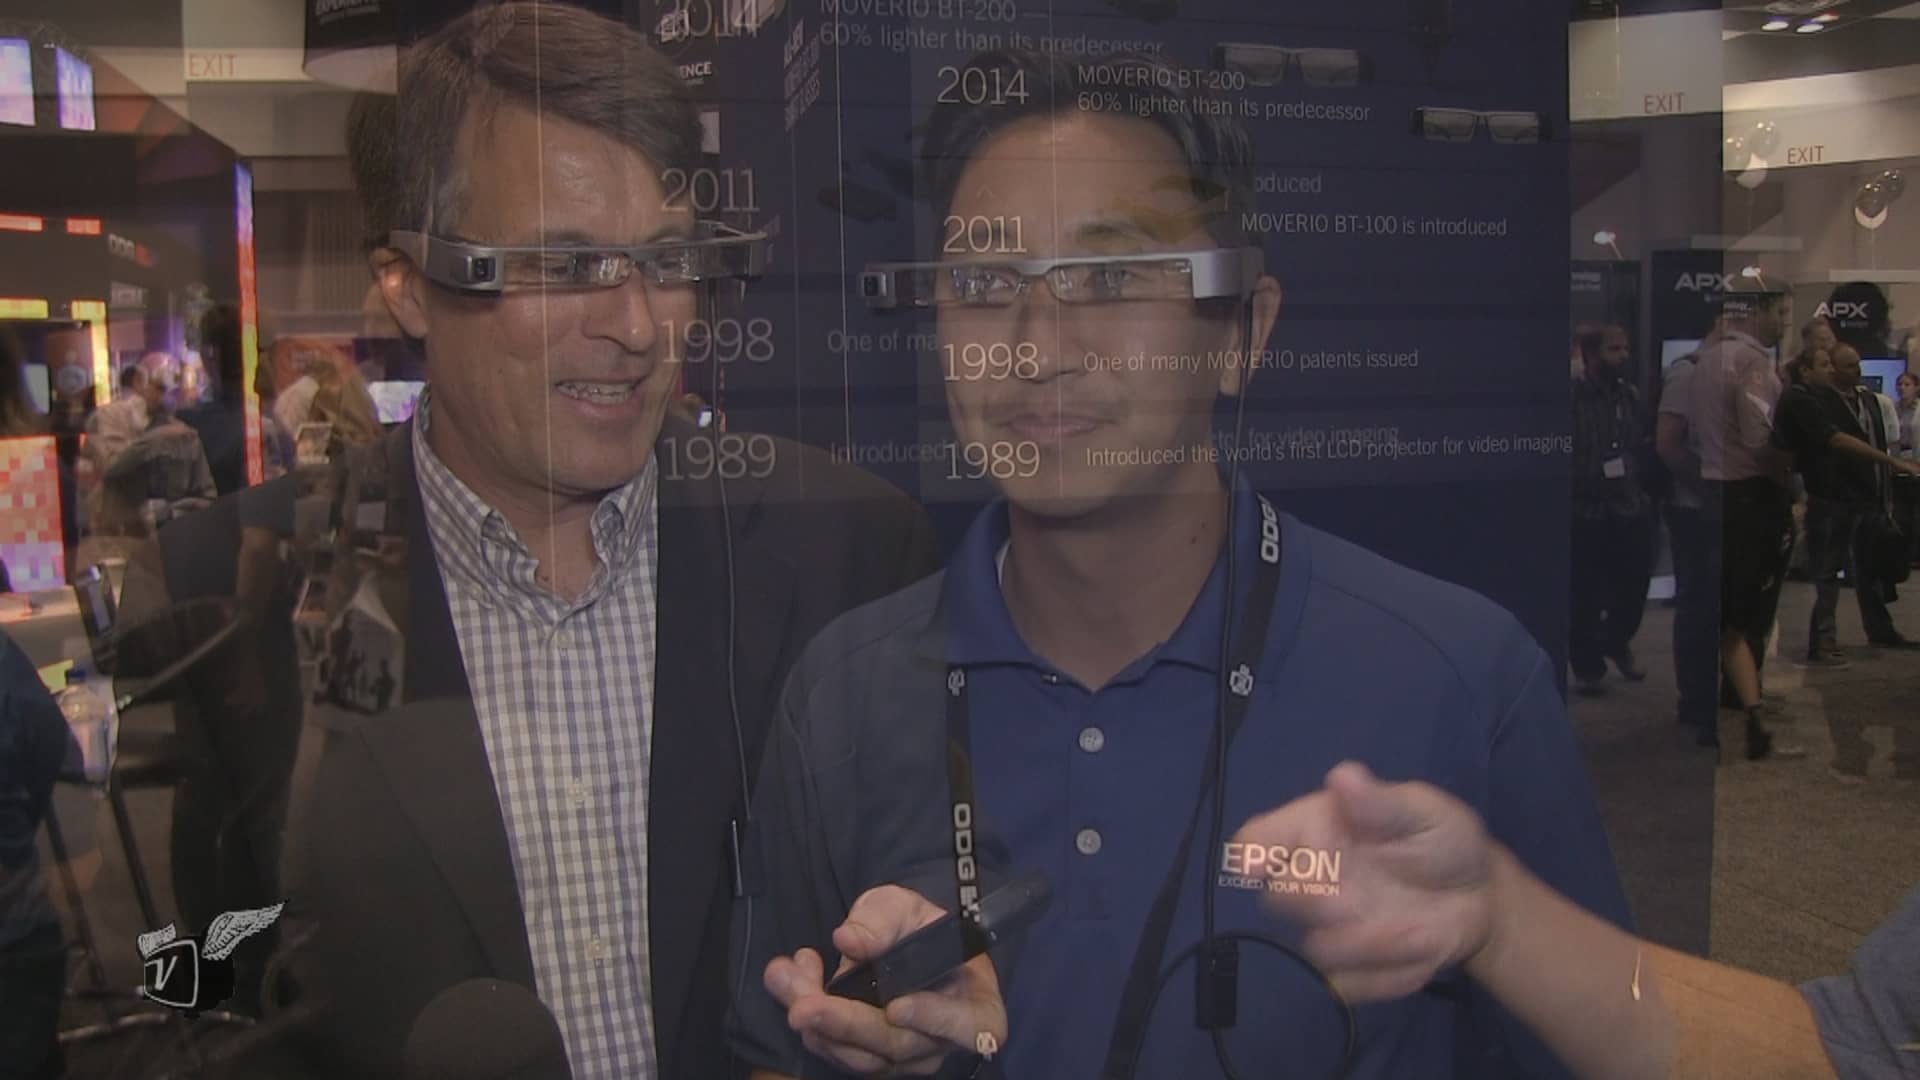 The demonstration of some pretty lightweight smart glasses.